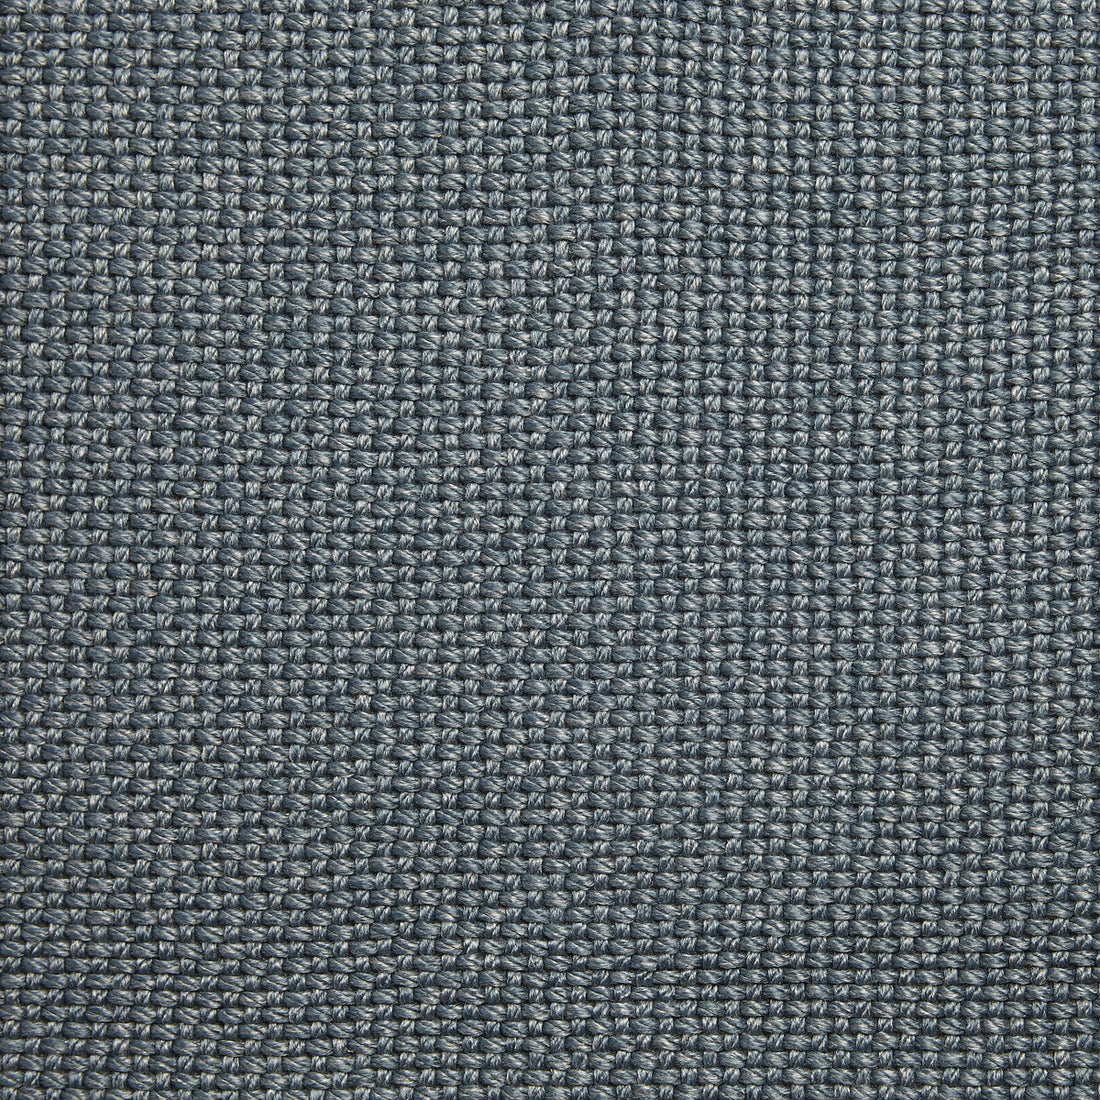 Begur fabric in 4 color - pattern LZ-30397.04.0 - by Kravet Design in the Lizzo Indoor/Outdoor collection